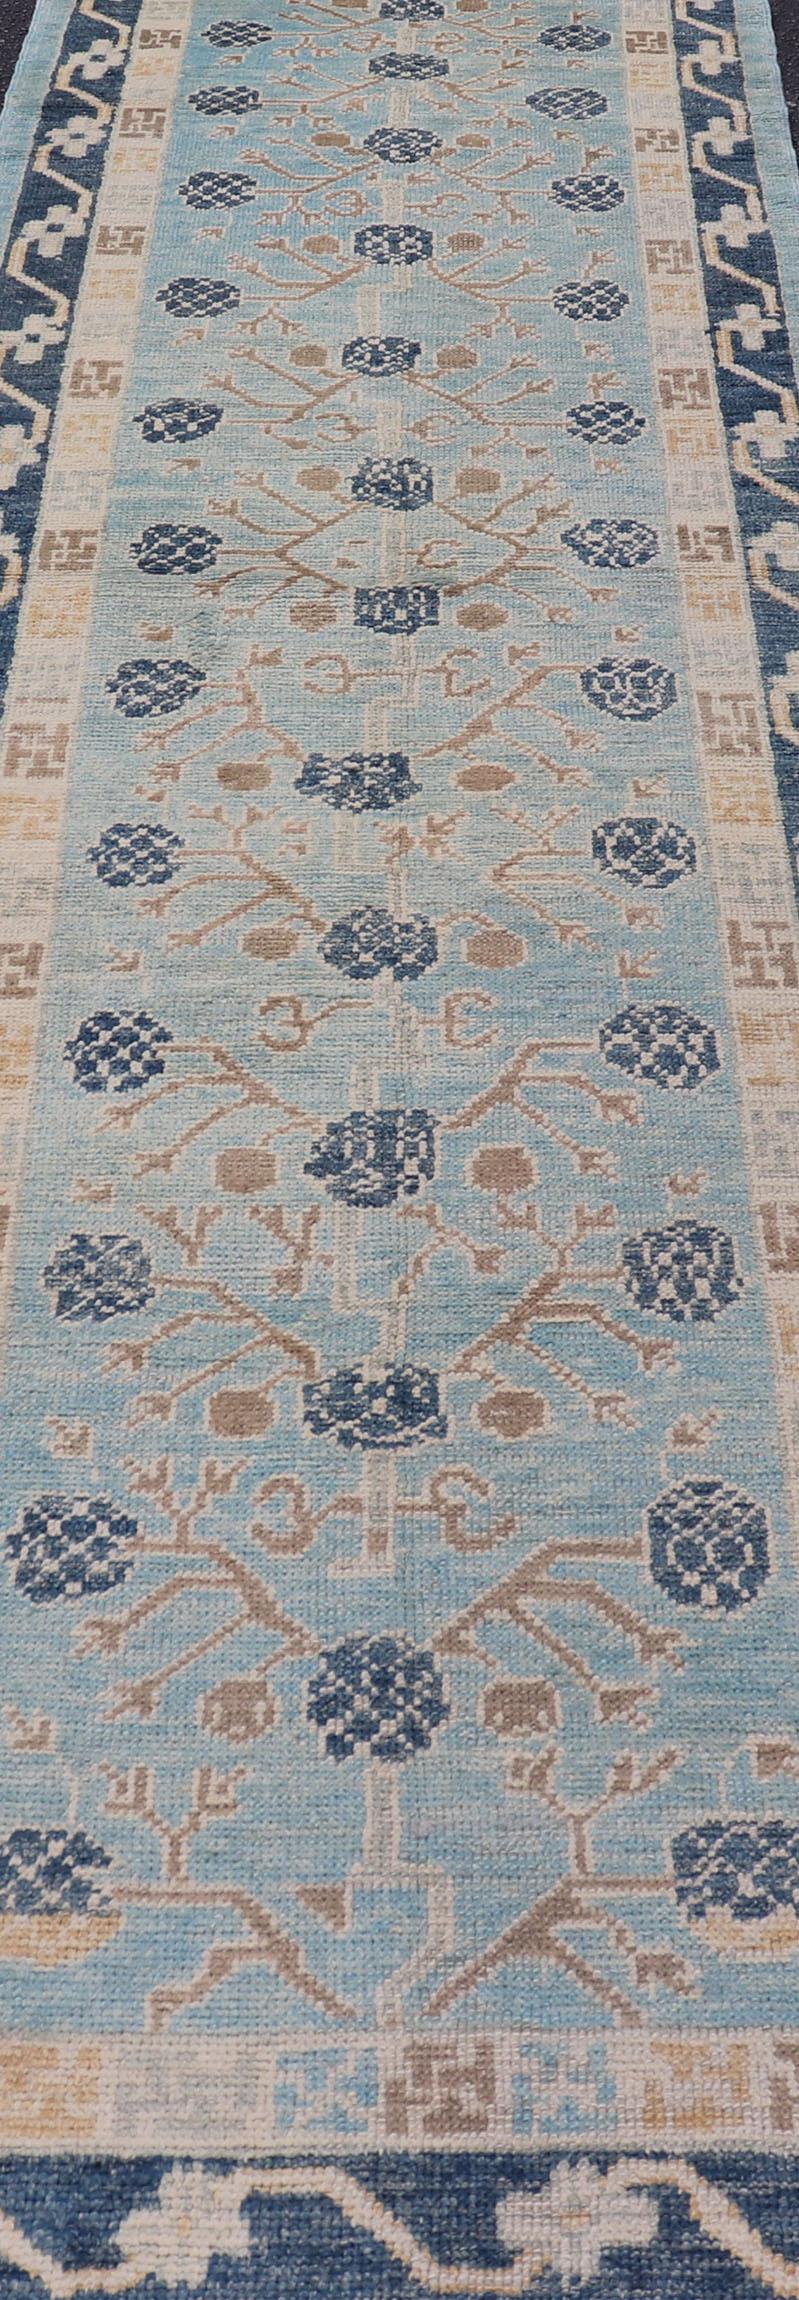 Contemporary Turkish Khotan Designed Runner with Pomegranate Design in Cream, Tan and Blues For Sale